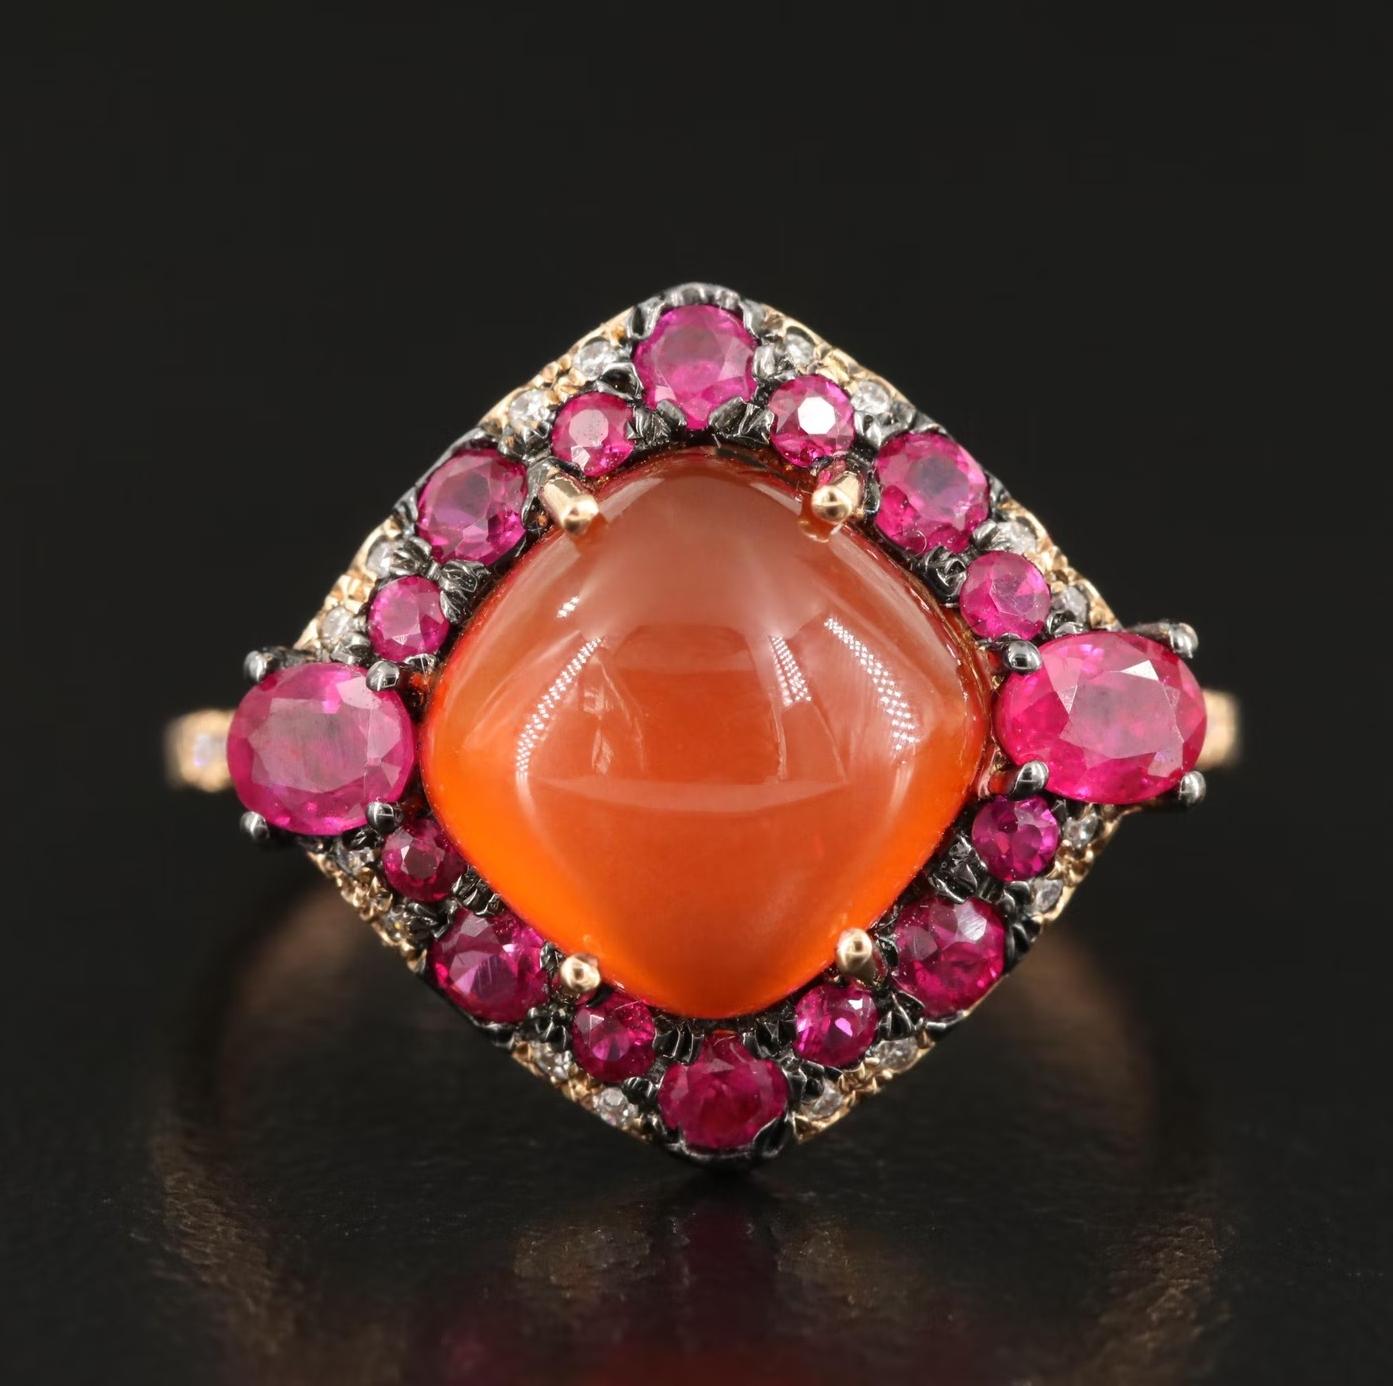 IDJ (International Diamond Jewelry) Designer ring - fully hallmarked 18K   IDJ    D014    R104

NEW WITH TAGS, Tag Price $4950

3.65 CWT Diamond (SI-VS/G) and Gemstone (Carnelian and Ruby)

3.7 grams in weight 

18K Rose gold, stamped 18K

Head